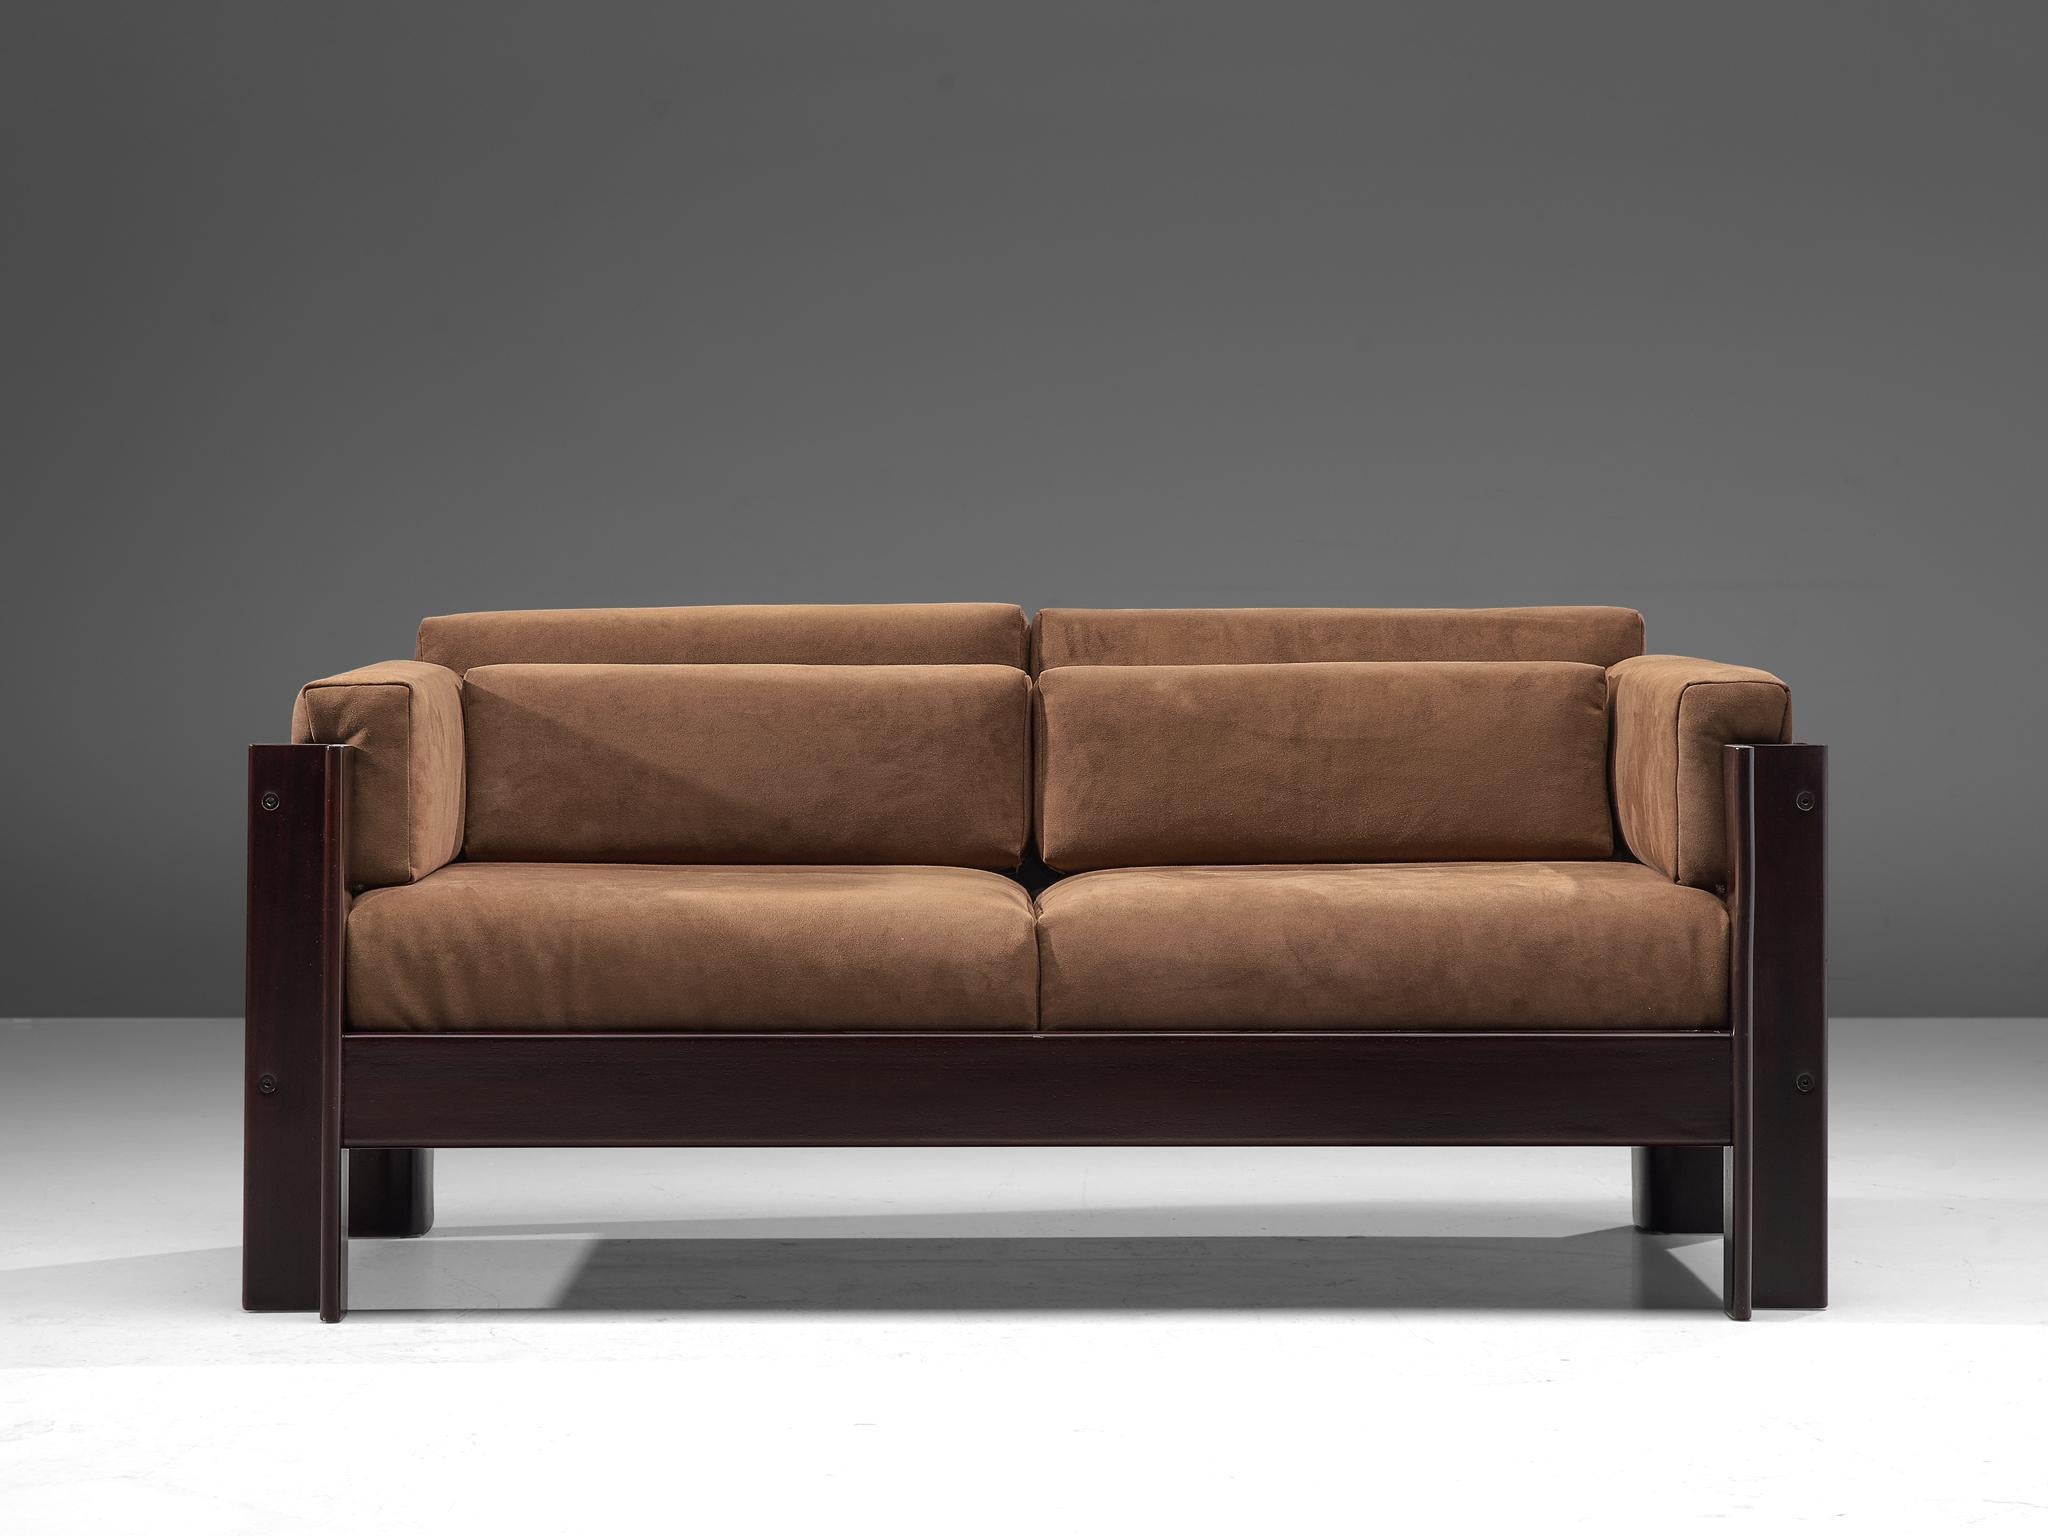 Sergio Asti for Poltronova, 'Zelda' sofa, fabric and darkened wood, Italy, 1962. 

Beautiful settee sofa designed by Sergio Asti for Poltronova. The sofa is made with a dark wooden frame and the cushions are upholstered in taupe colored fabric.